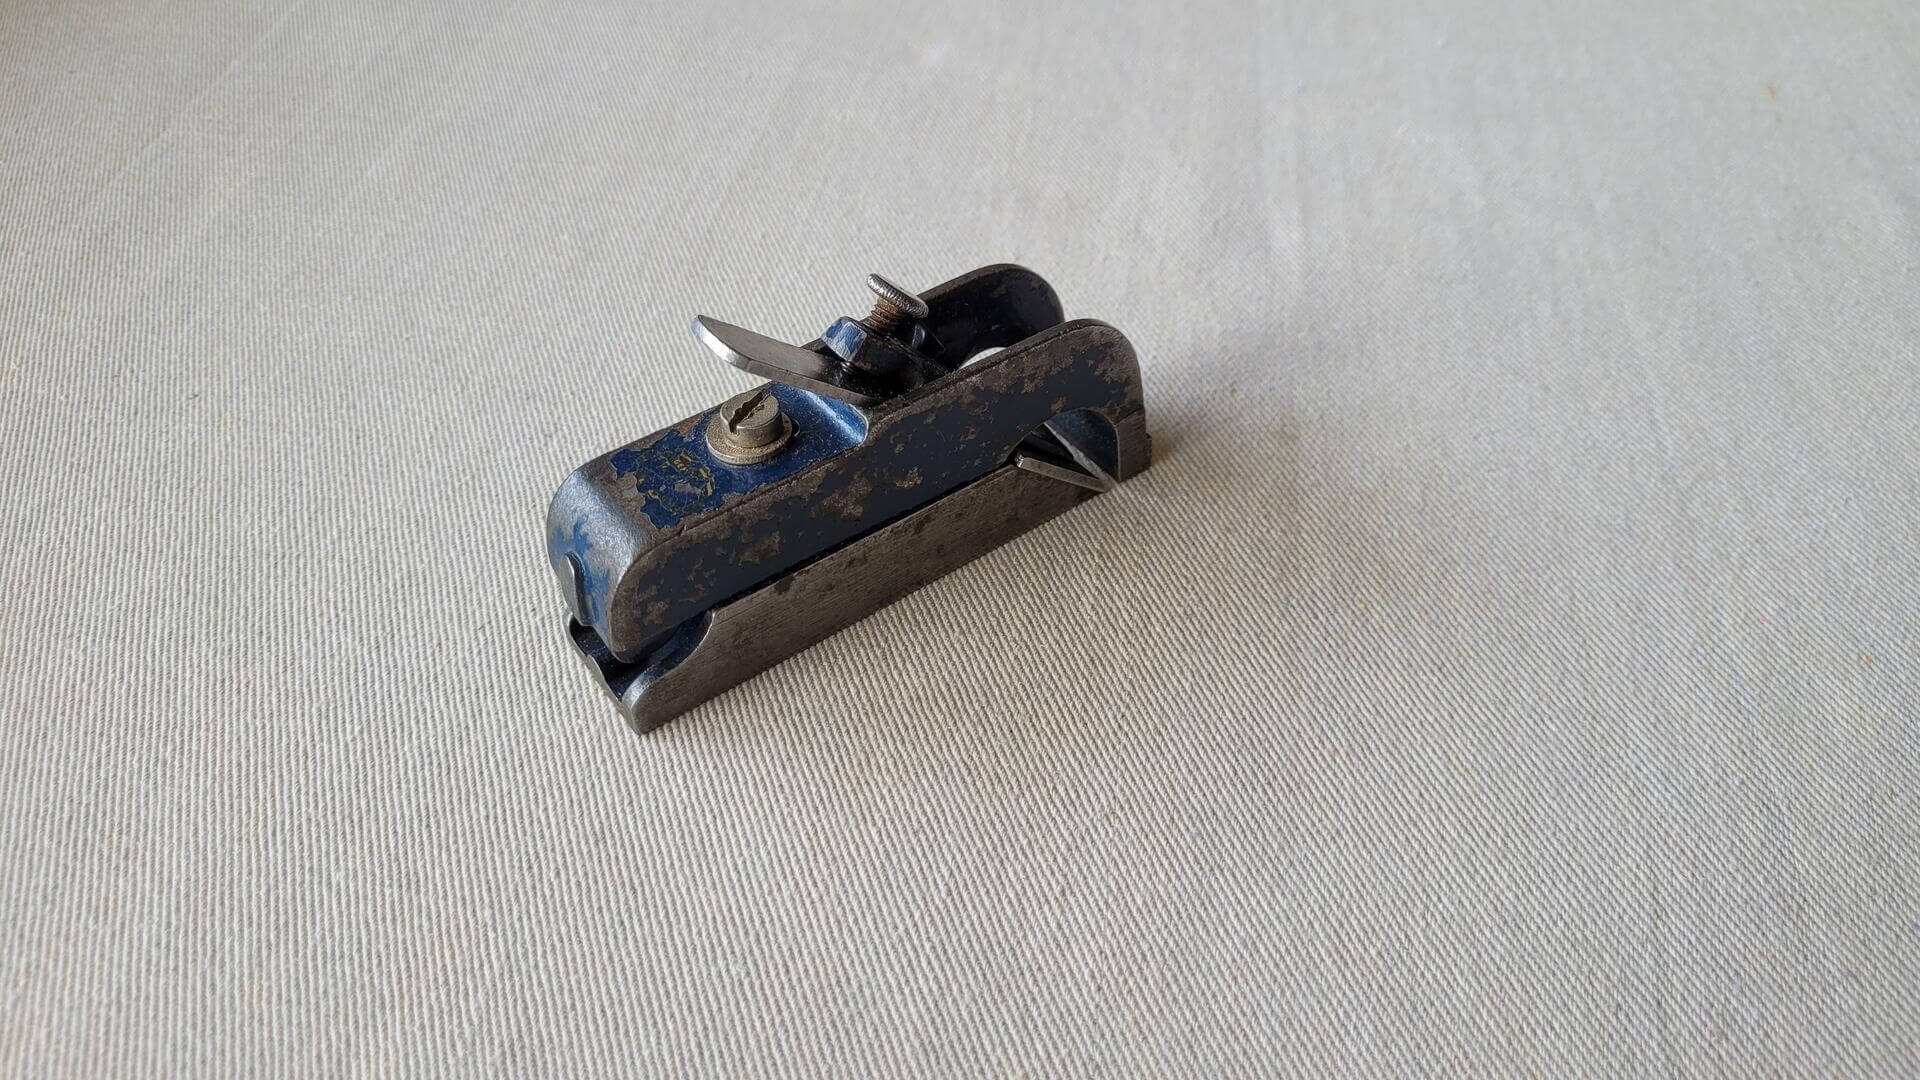 Vintage Record No. 075 cast iron bullnose rabbet plane japanned blue finish. Antique made in Sheffield England collectible carpentry woodworking hand tools